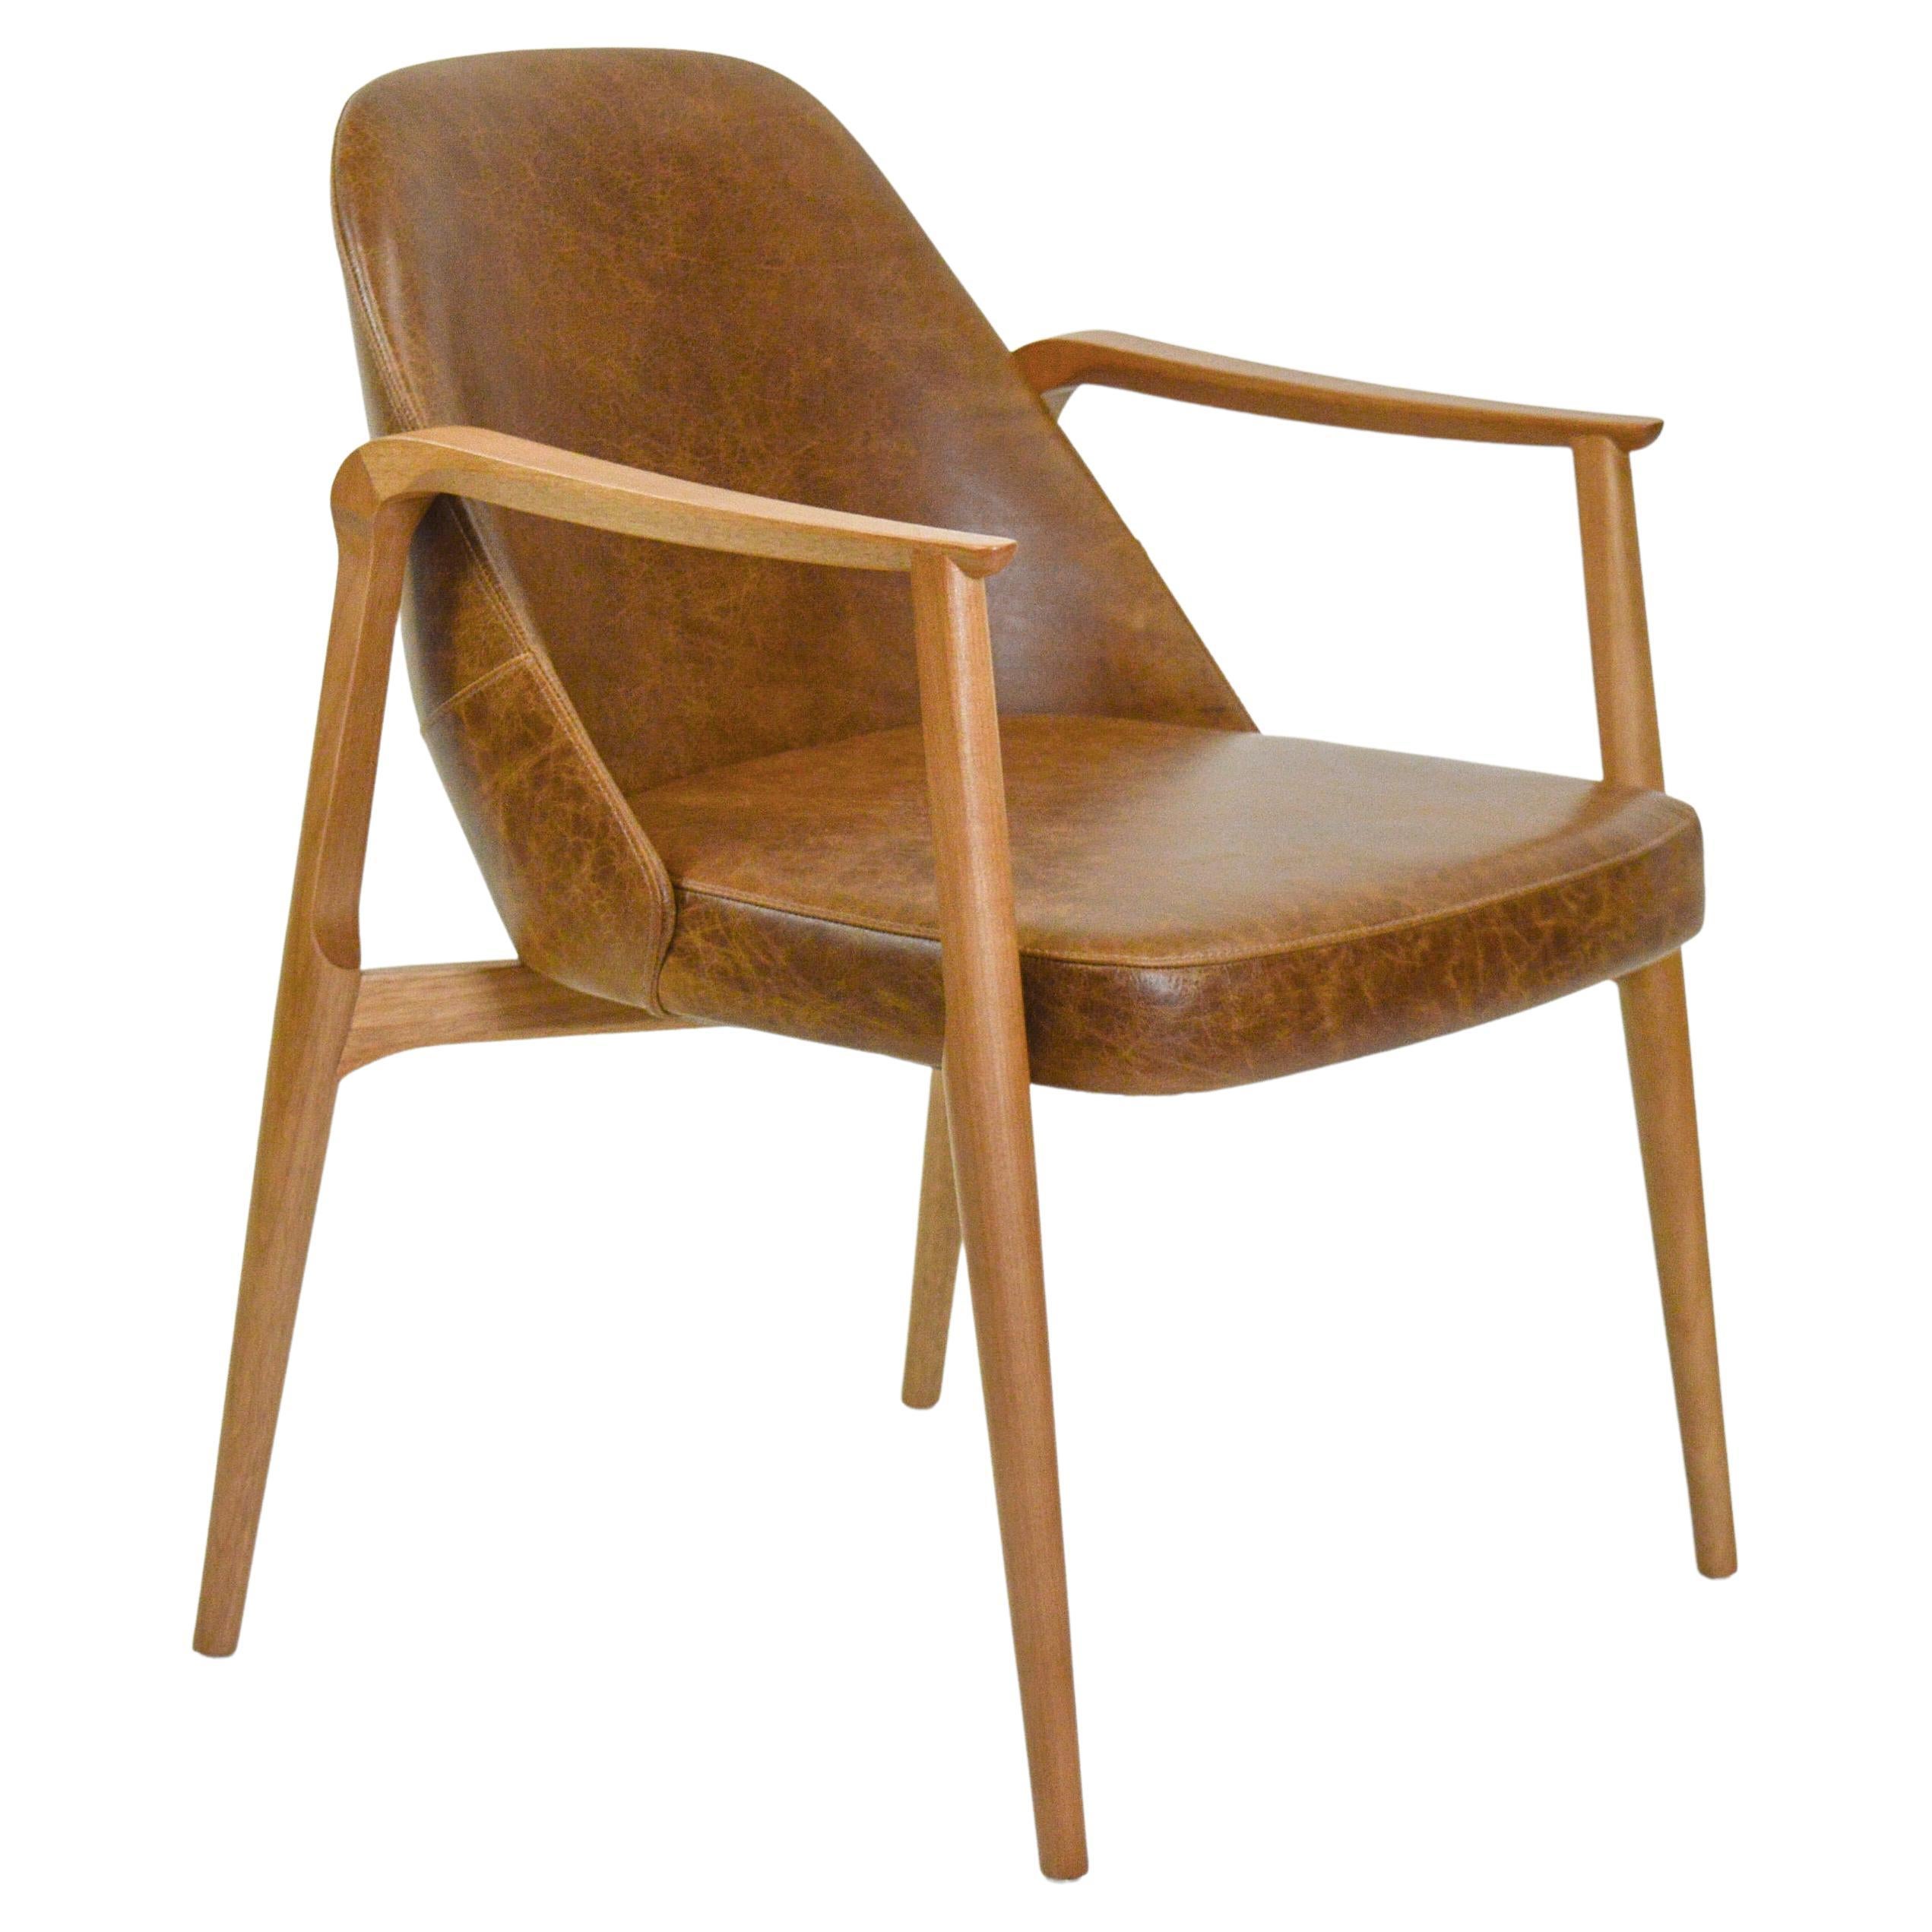 Leather, Wood Legs, Dandara Dining Chair with Armrest